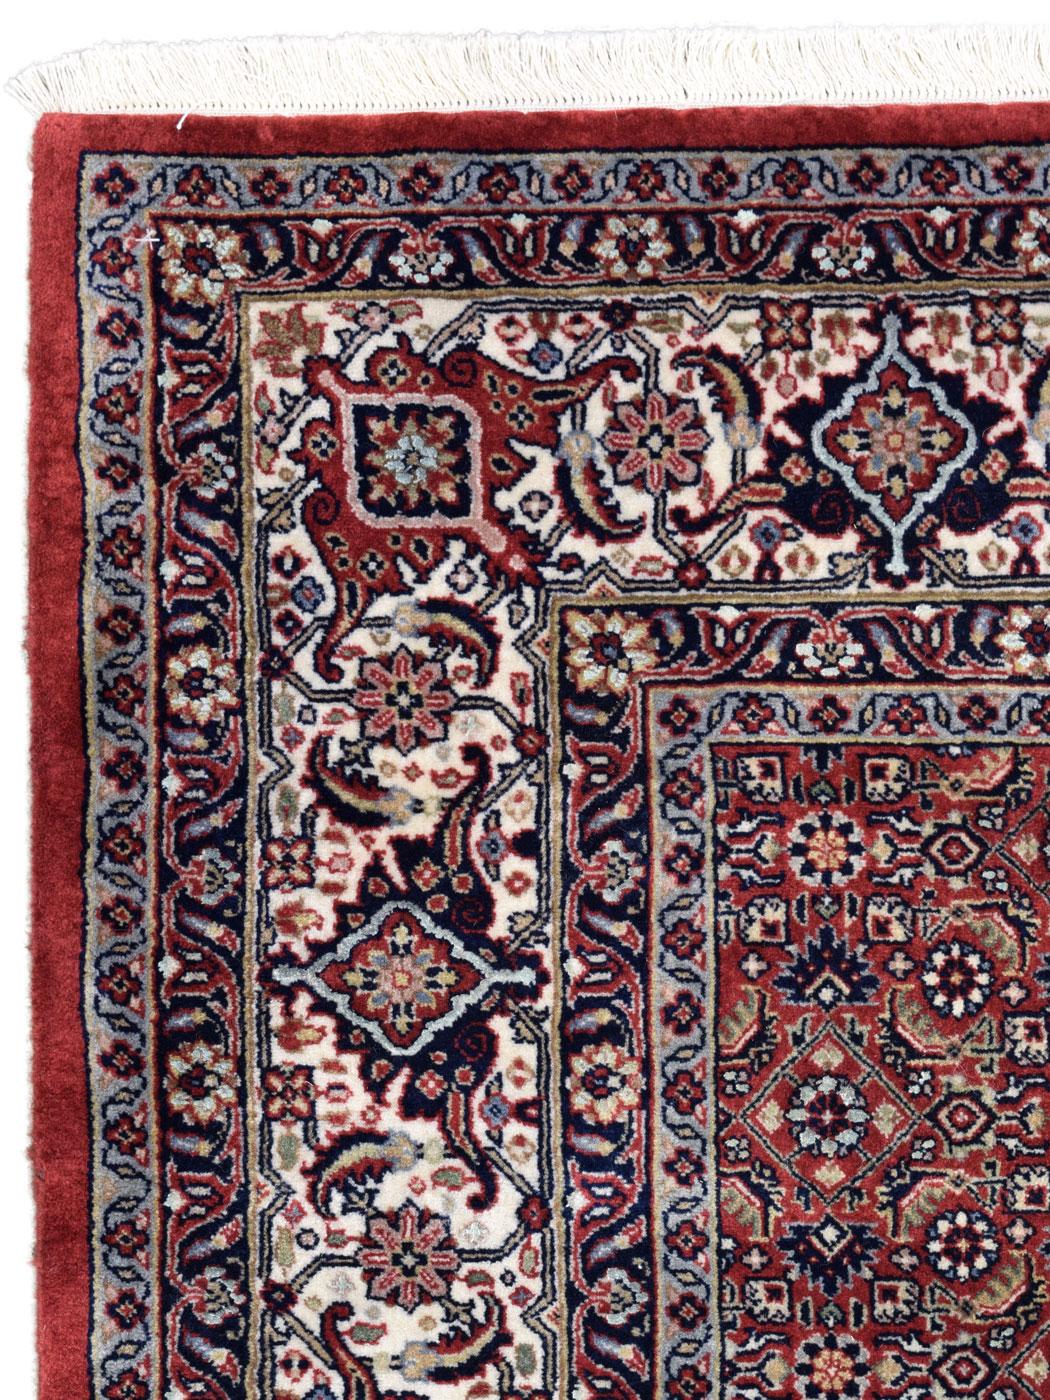 Classic Hand-Knotted Bidjar Carpet in Red, Indigo, and Cream Wool, 5' x 7' In New Condition For Sale In New York, NY